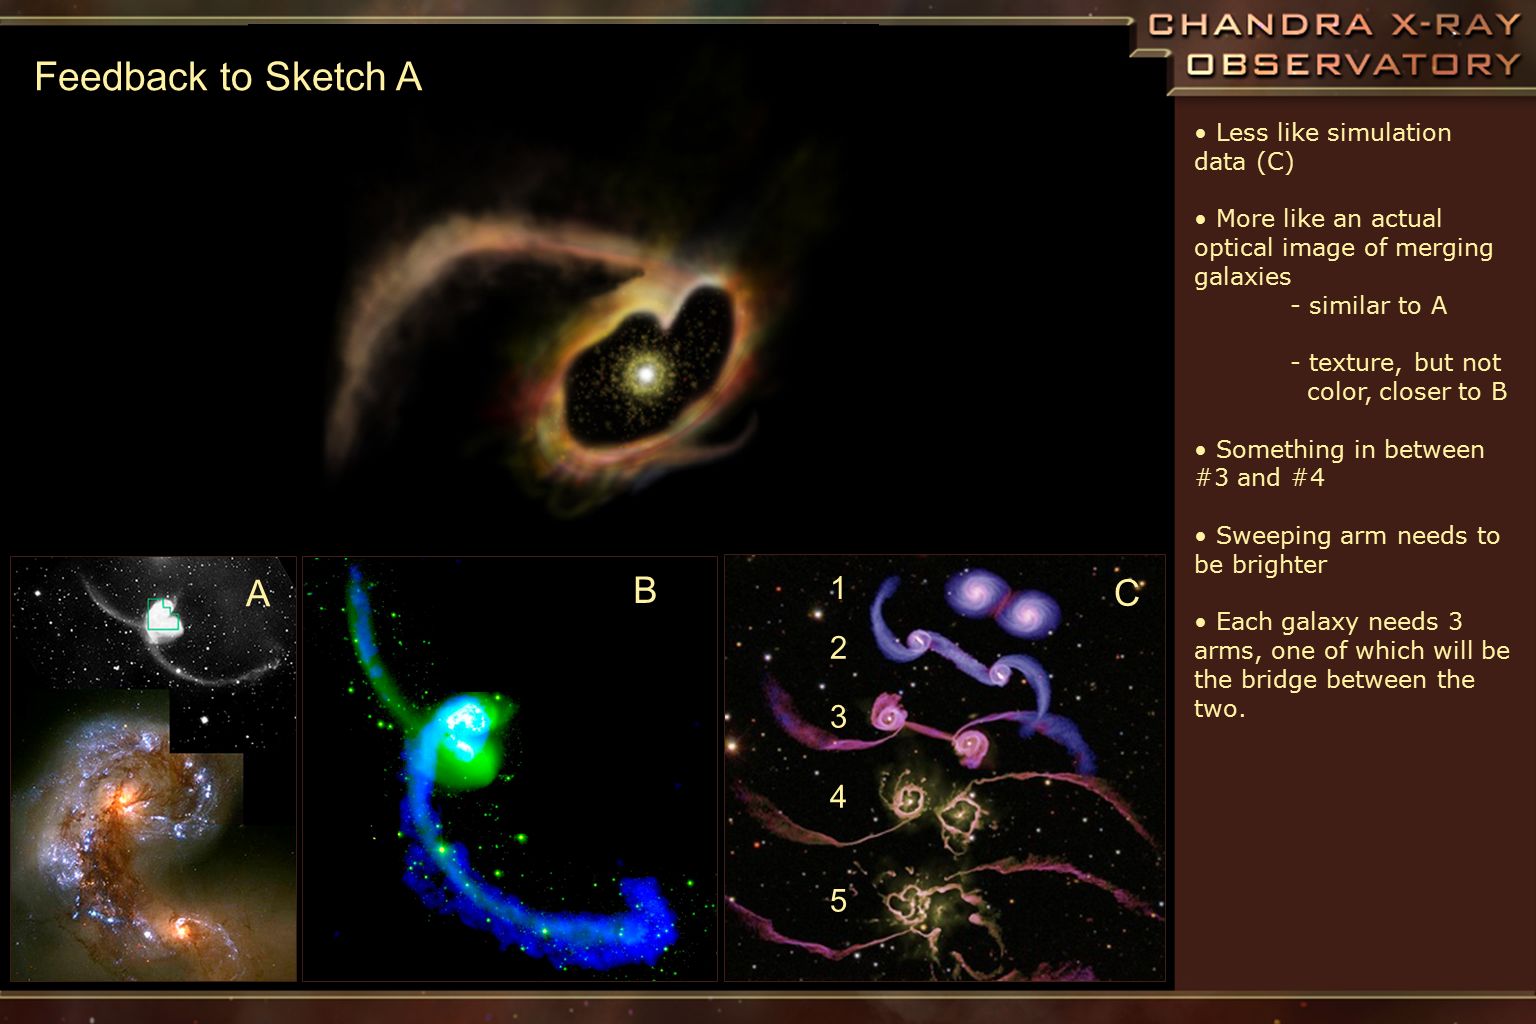 B Feedback to Sketch A 1 Less like simulation data (C) More like an actual optical image of merging galaxies - similar to A - texture, but not color, closer to B Something in between #3 and #4 Sweeping arm needs to be brighter Each galaxy needs 3 arms, one of which will be the bridge between the two.